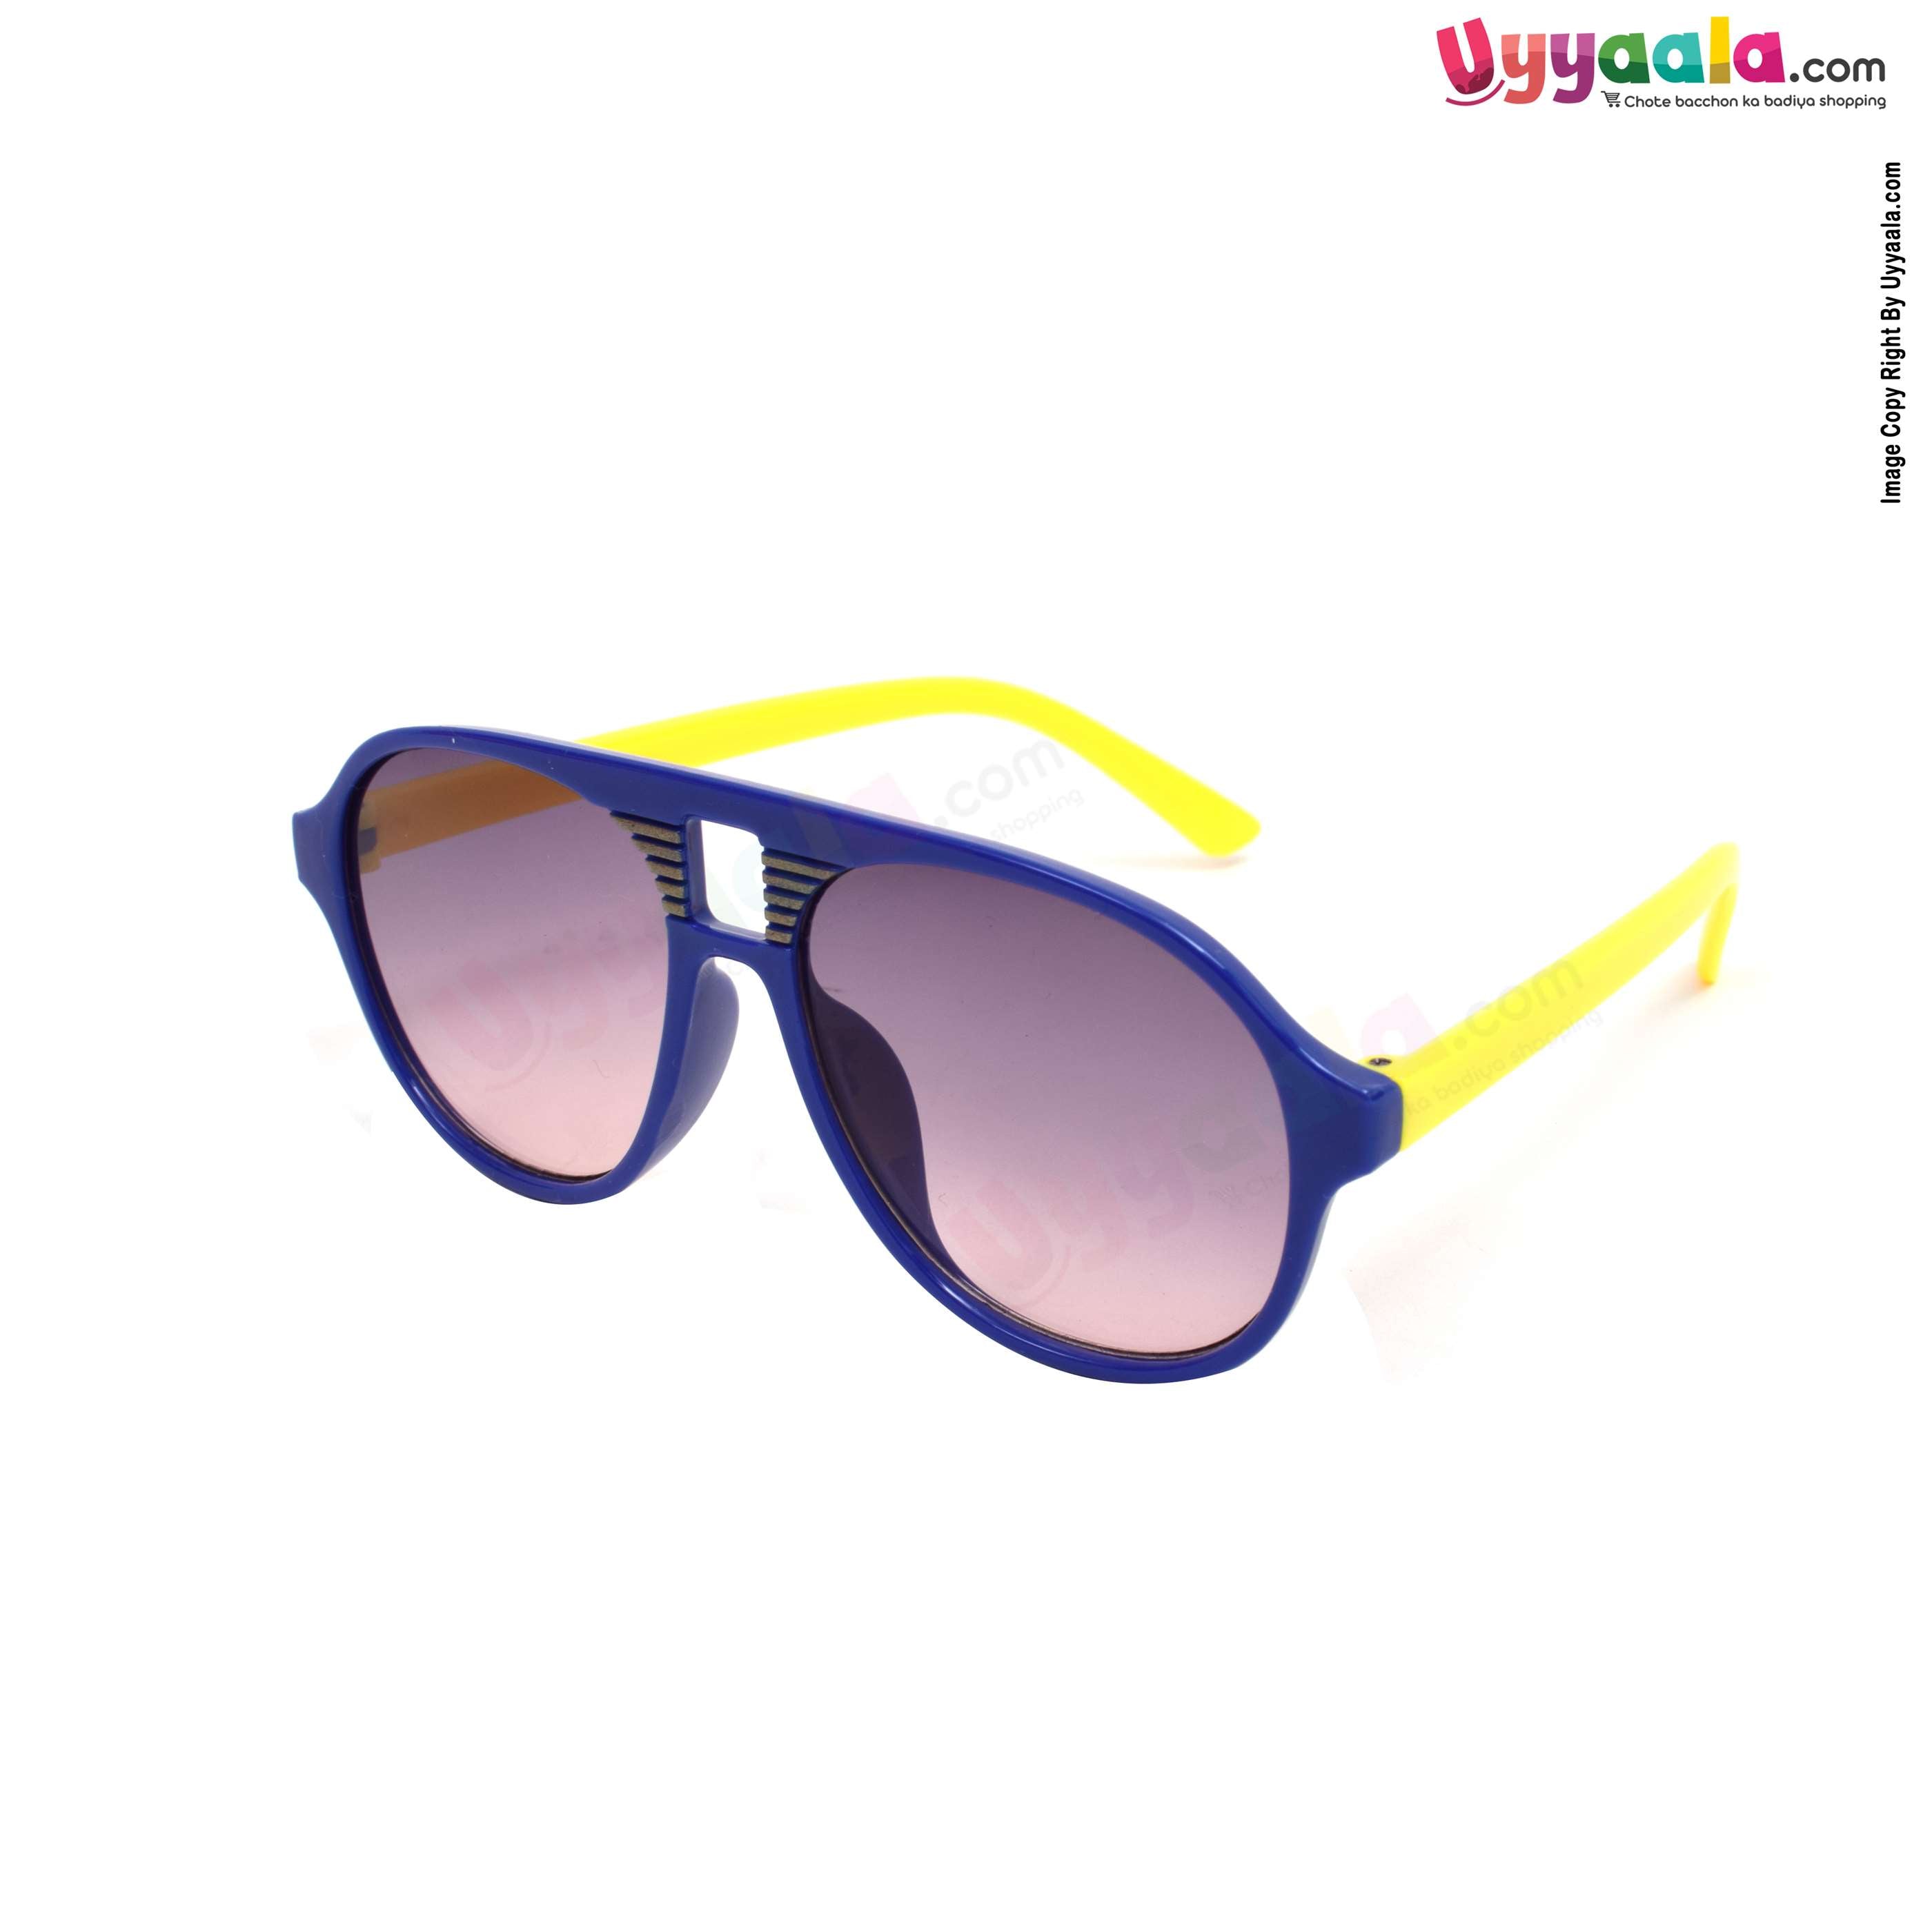 Trendy aviator cat-eye tinted goggles for kids - navy blue & yellow, 2 - 12 years